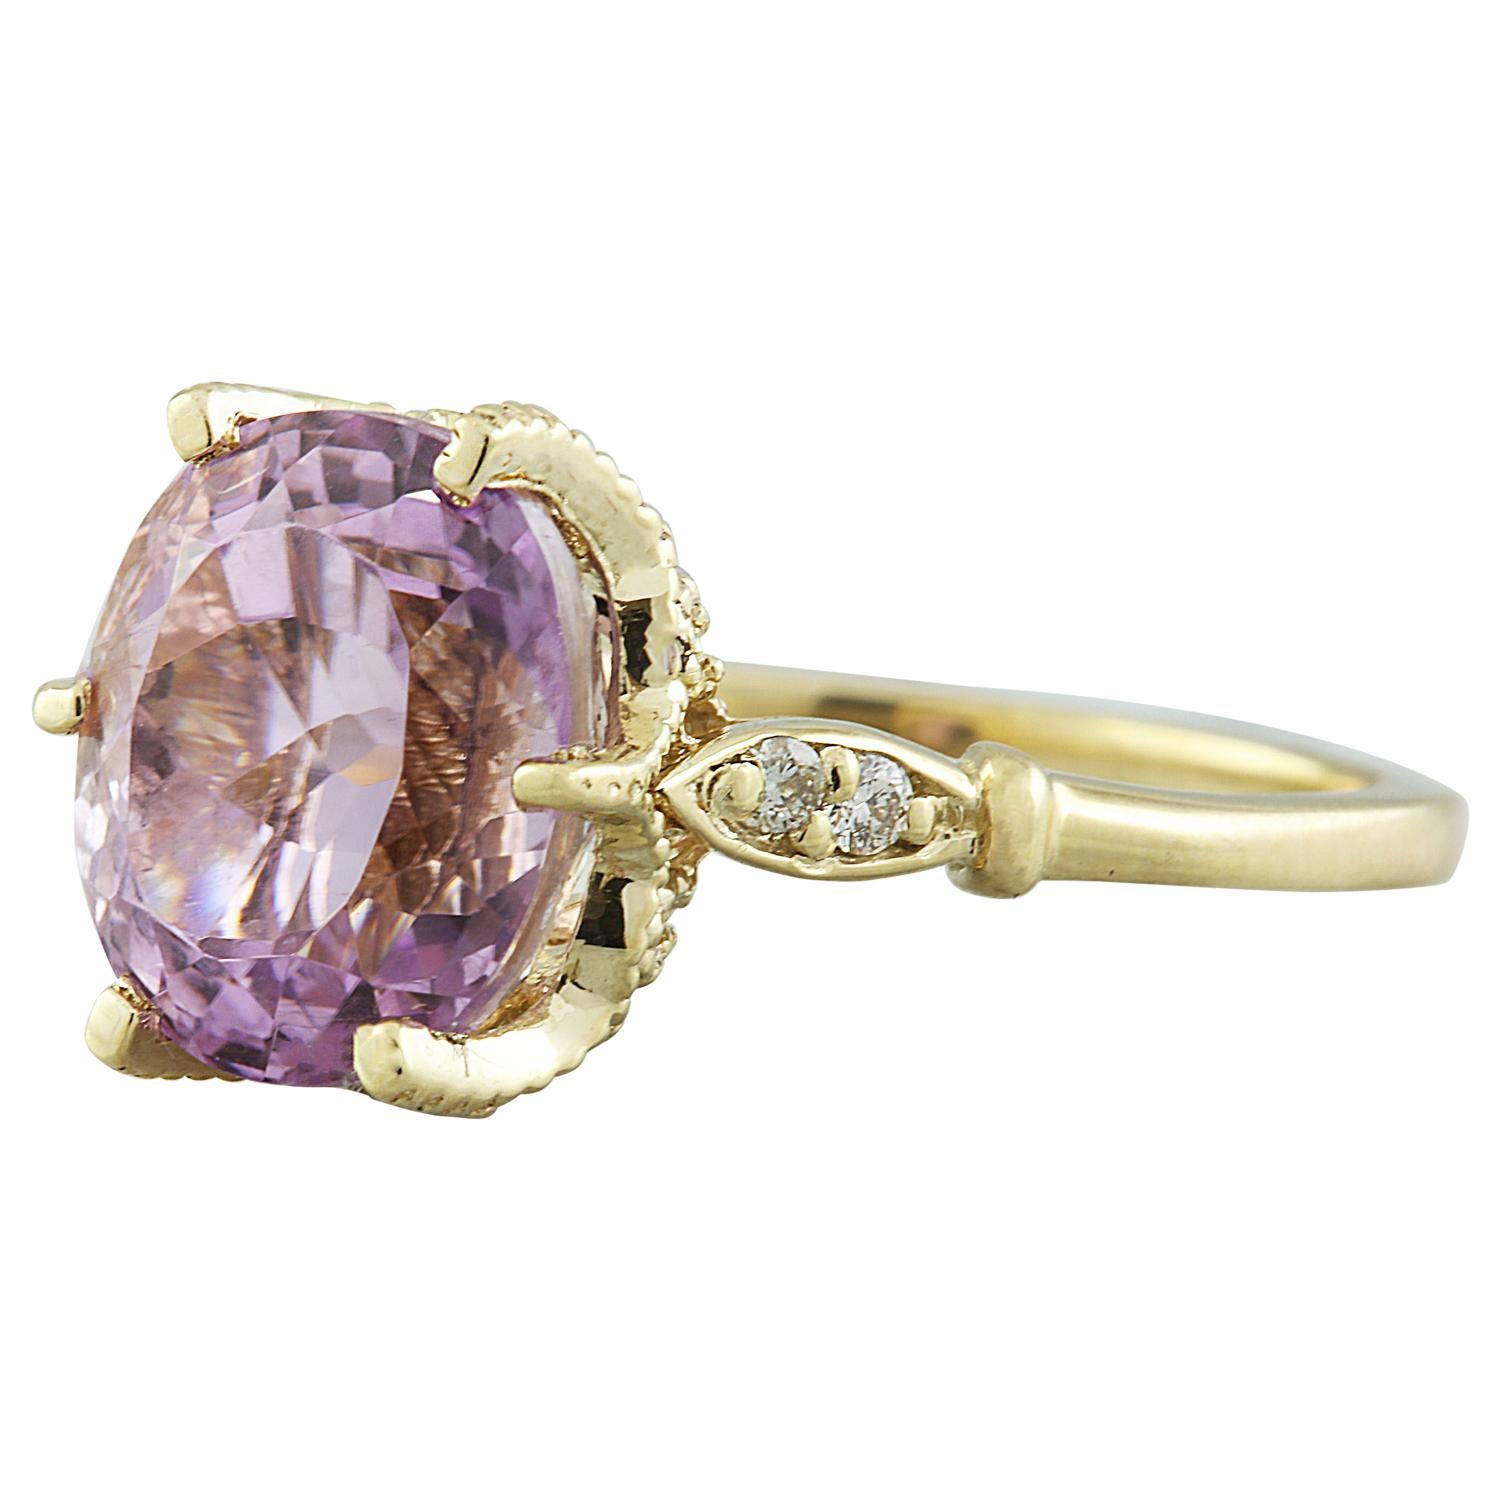 5.41 Carat Natural Kunzite 14 Karat Solid Yellow Gold Diamond Ring
Stamped: 14K 
Total Ring Weight: 4.3 Grams 
Kunzite Weight: 5.26 Carat (11.00x9.00 Millimeters)  
Diamond Weight: 0.15 carat (F-G Color, VS2-SI1 Clarity )
Quantity: 4
Face Measures: